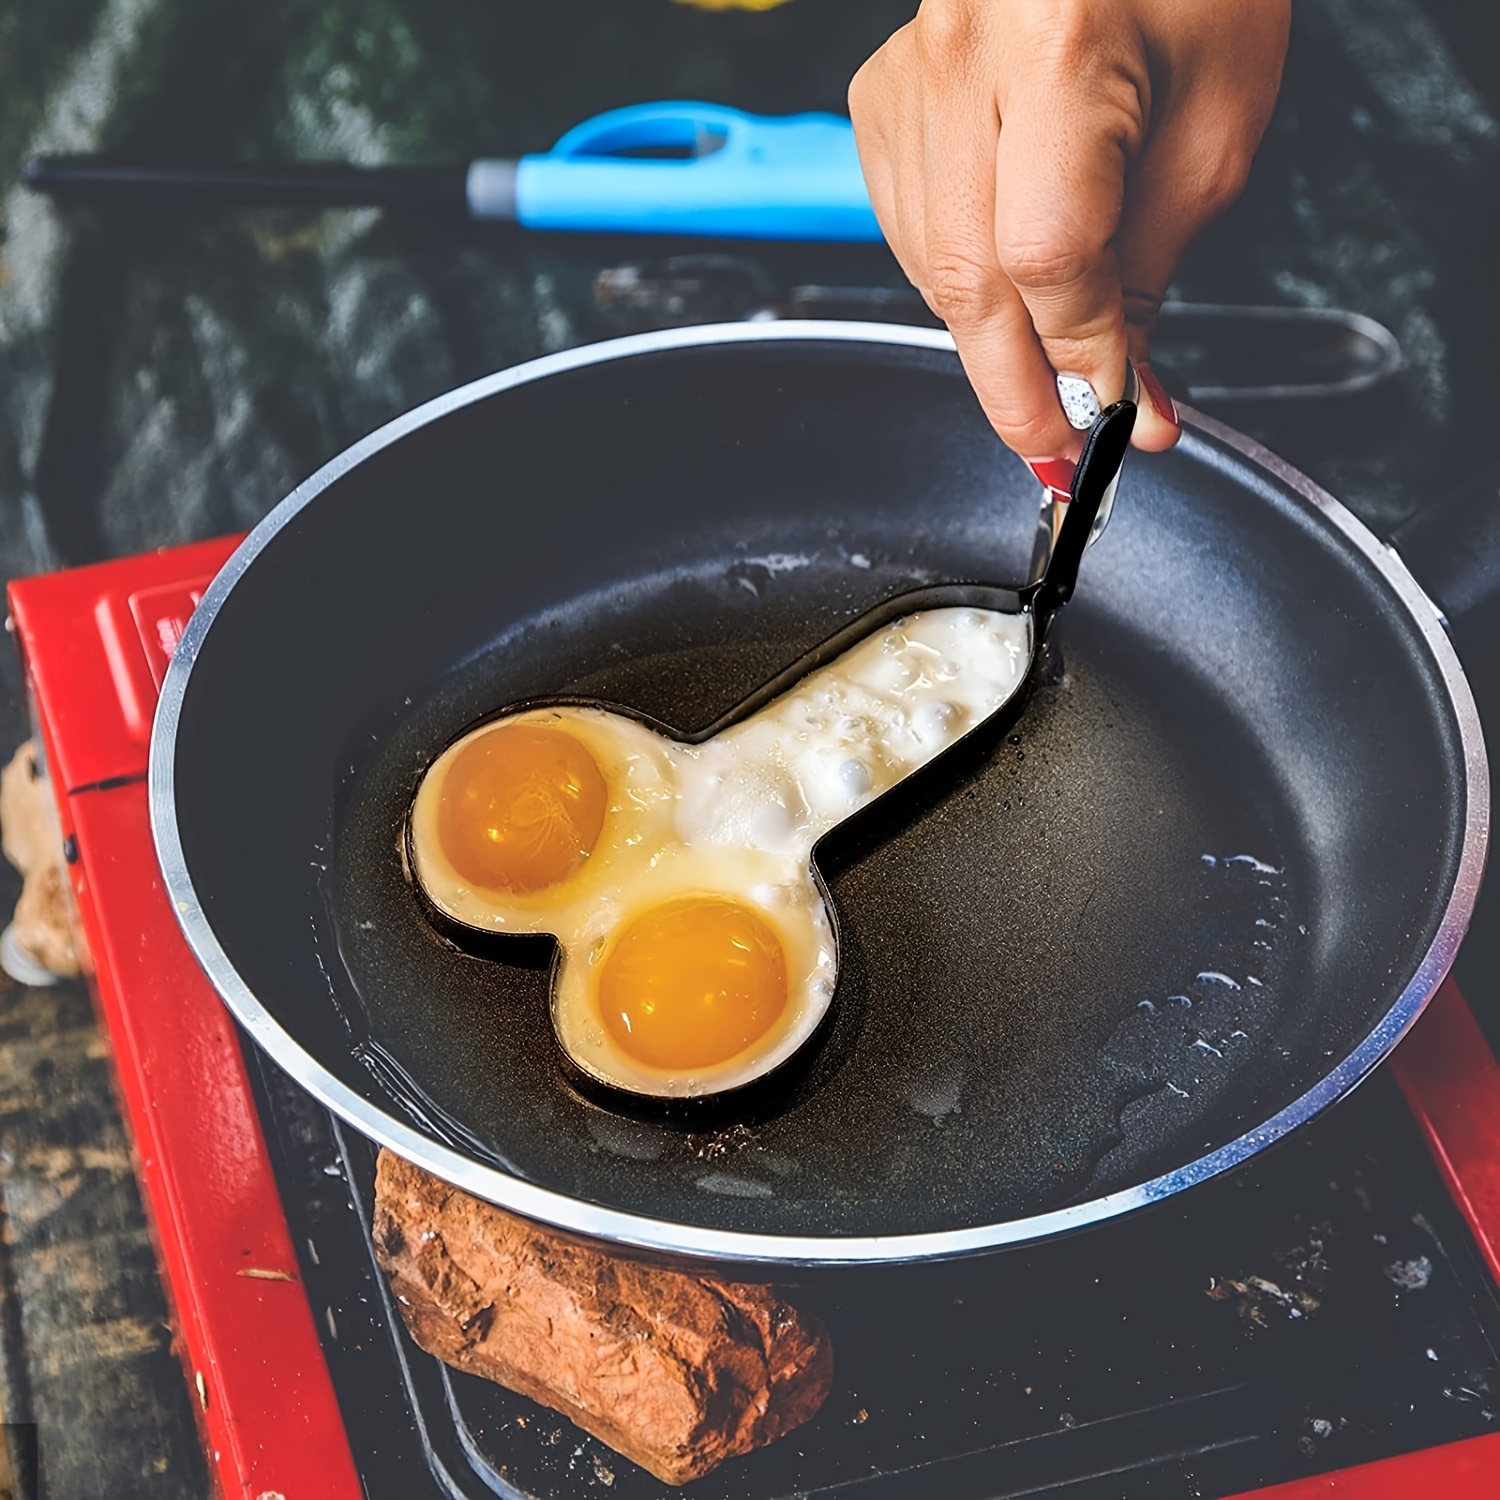 1pc Funny Egg Ring Shape Stainless Steel Egg Cooking Rings Dick Shape  Pancake Mold For Frying Eggs And Omelet Kitchen Gadgets Kitchen Stuff  Kitchen Accessories Home Kitchen Items